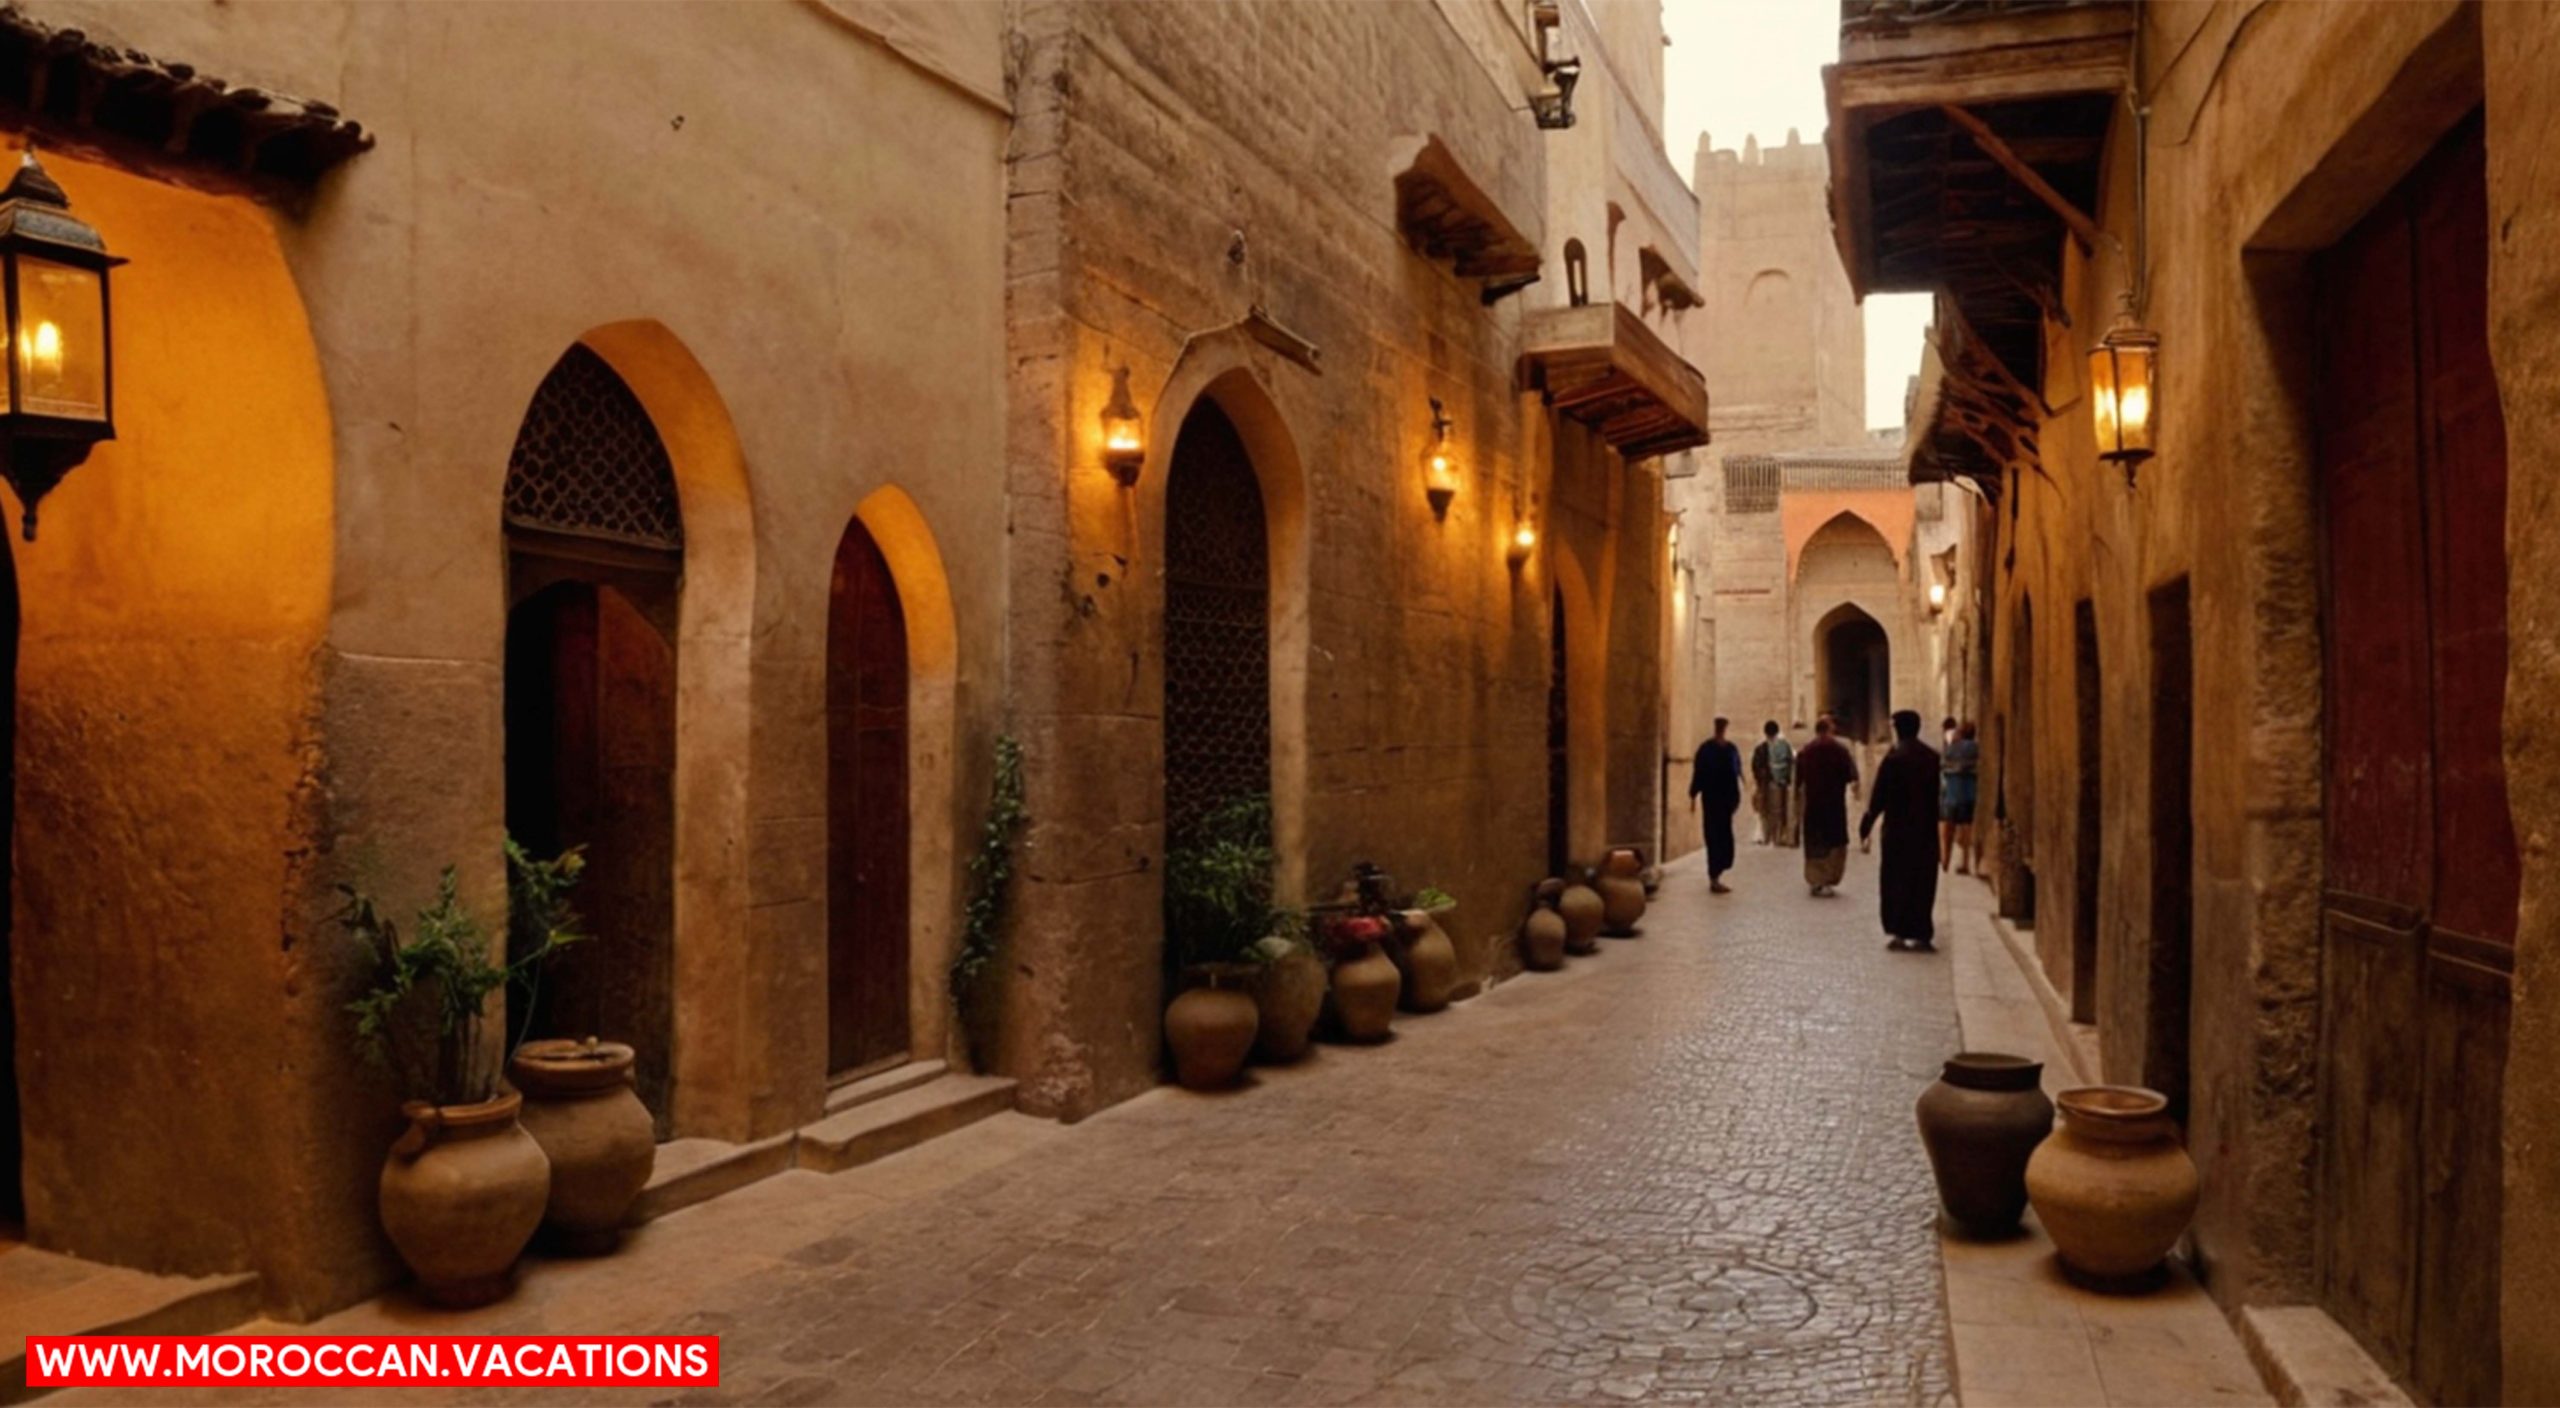 A winding, narrow stone pathway of the Fez Medina, showing vibrant souks, traditional Moroccan lamps.